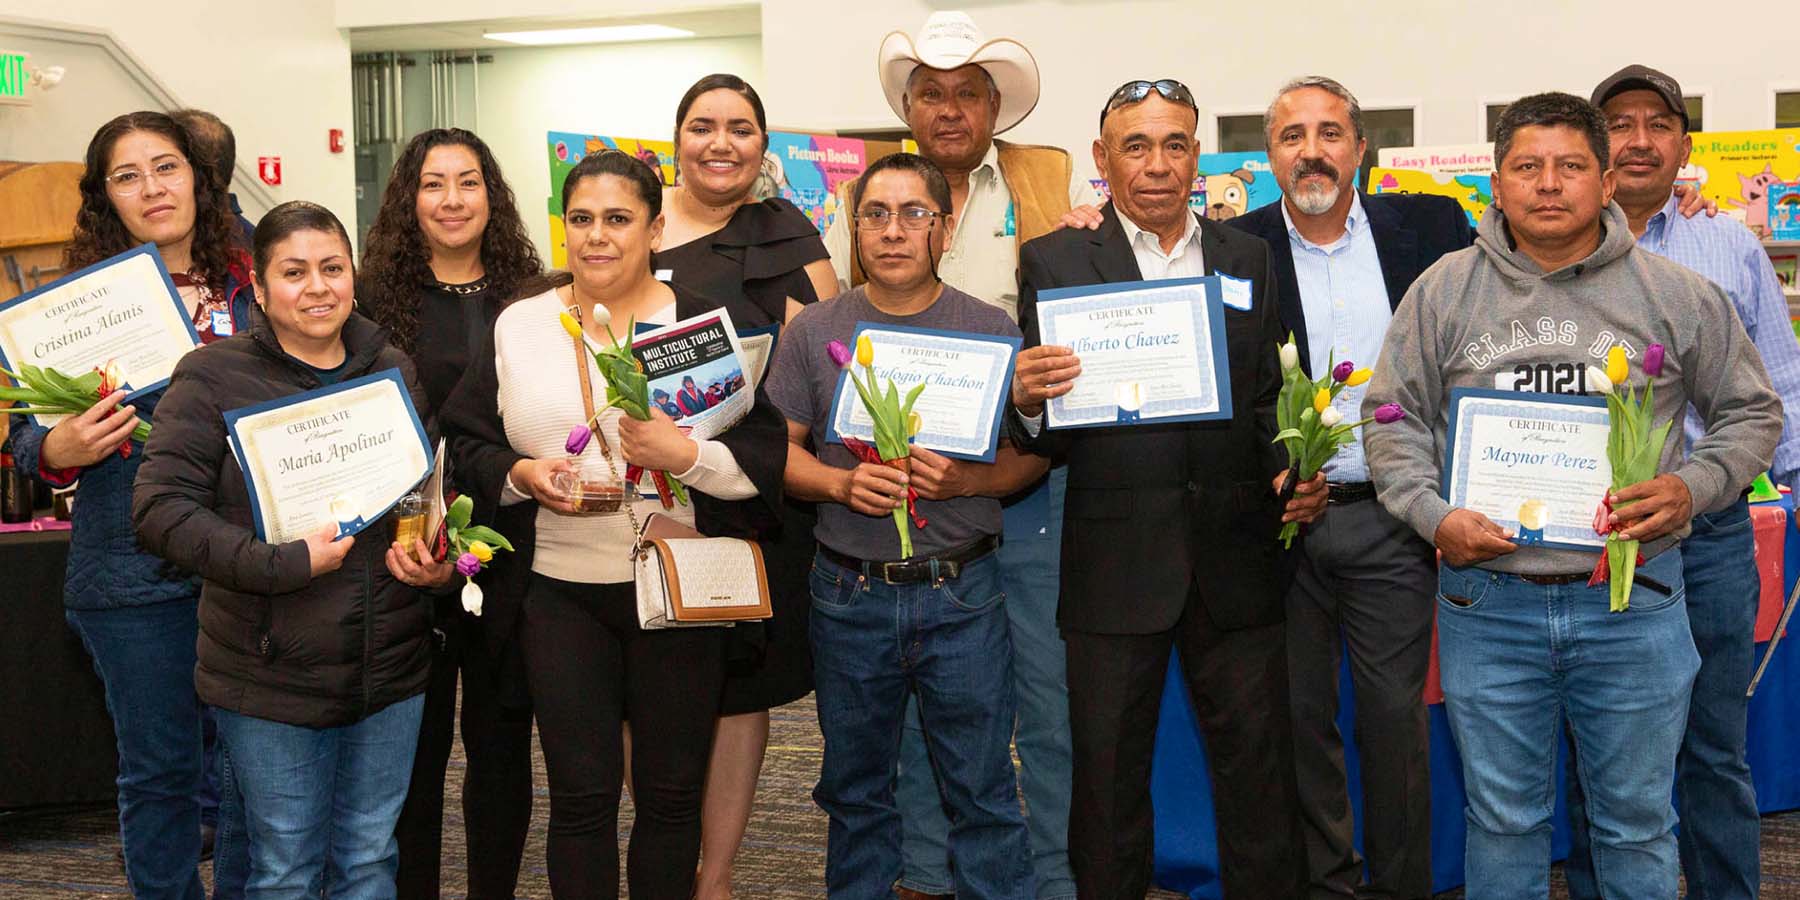 A group of people hold certificates and flowers and pose for a group photo.